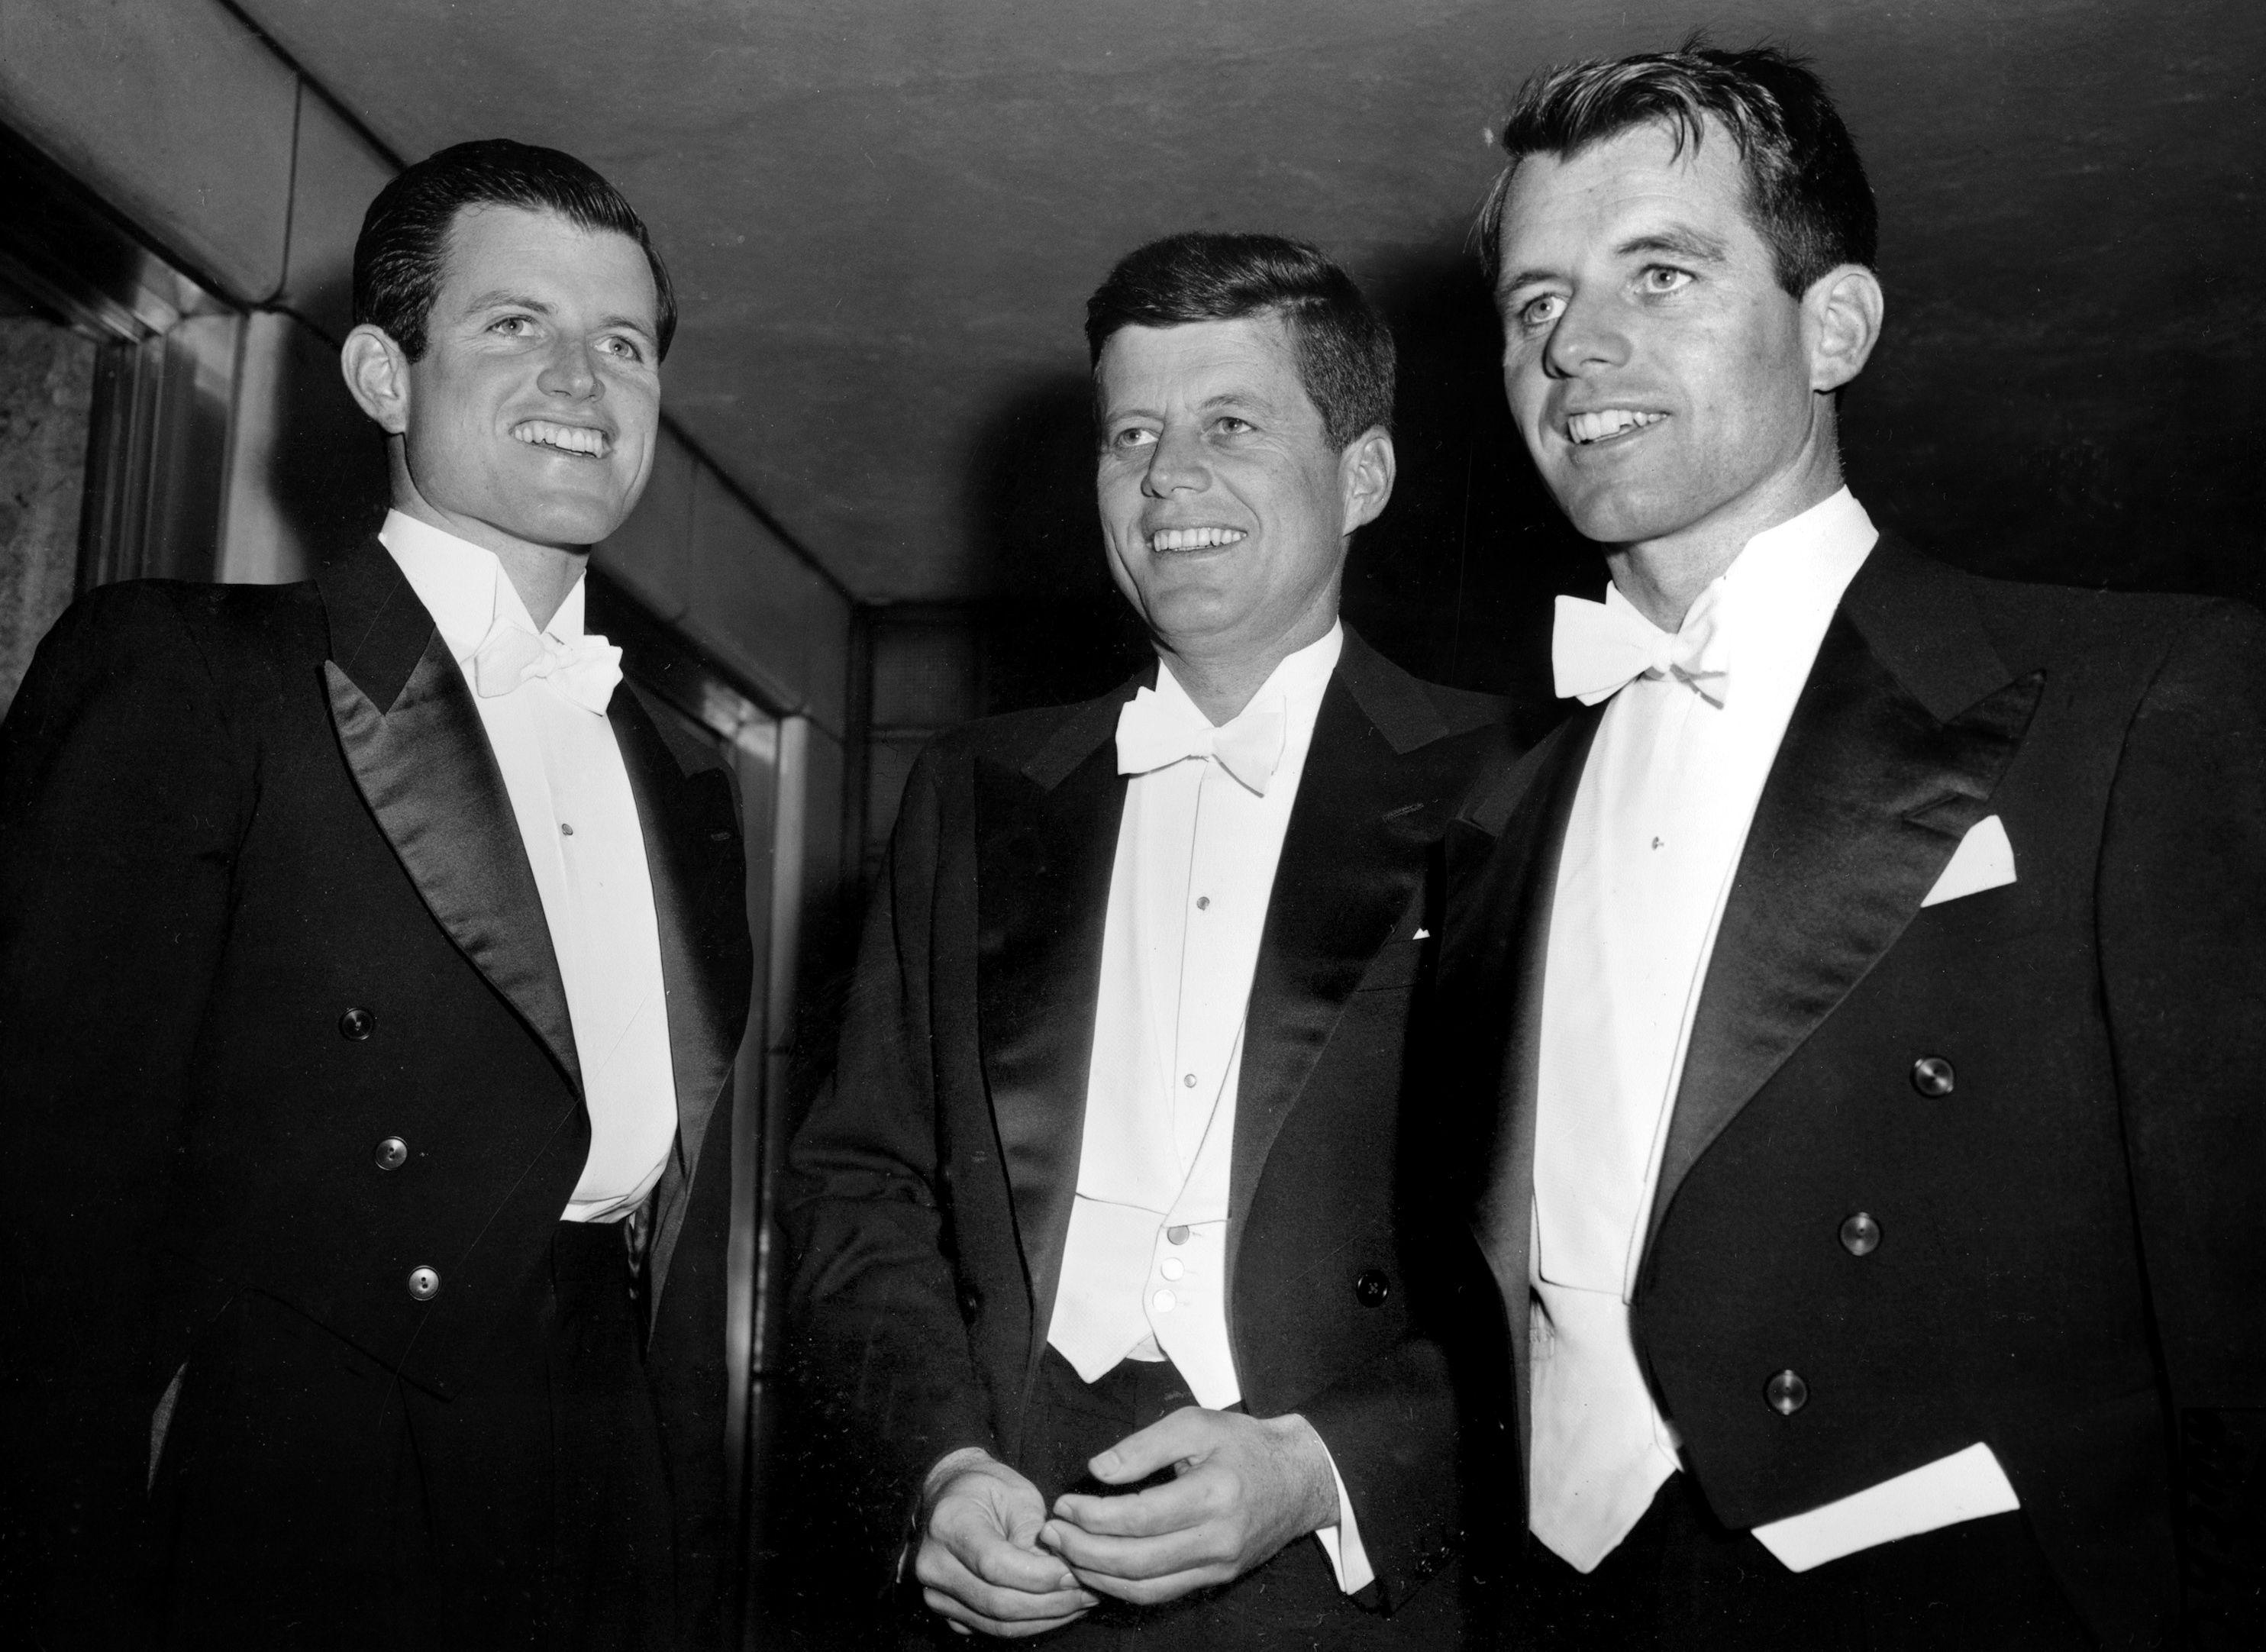 FILE-- Sen. John F. Kennedy, center, D-Mass., and his brothers Edward Kennedy, left, a student at the University of Virginia, and Robert F. Kennedy, chief counsel to the Senate Rackets Committee, attend the annual Gridiron Club dinner in Washington, D.C., on March 15, 1958. The suburban Boston house where Robert F. Kennedy was born, now a national historic site in tribute to his more famous brother, President John F. Kennedy, is holding a special exhibition to mark the 50th anniversary of RFK's assassination on June 6, 1968. (AP Photo)